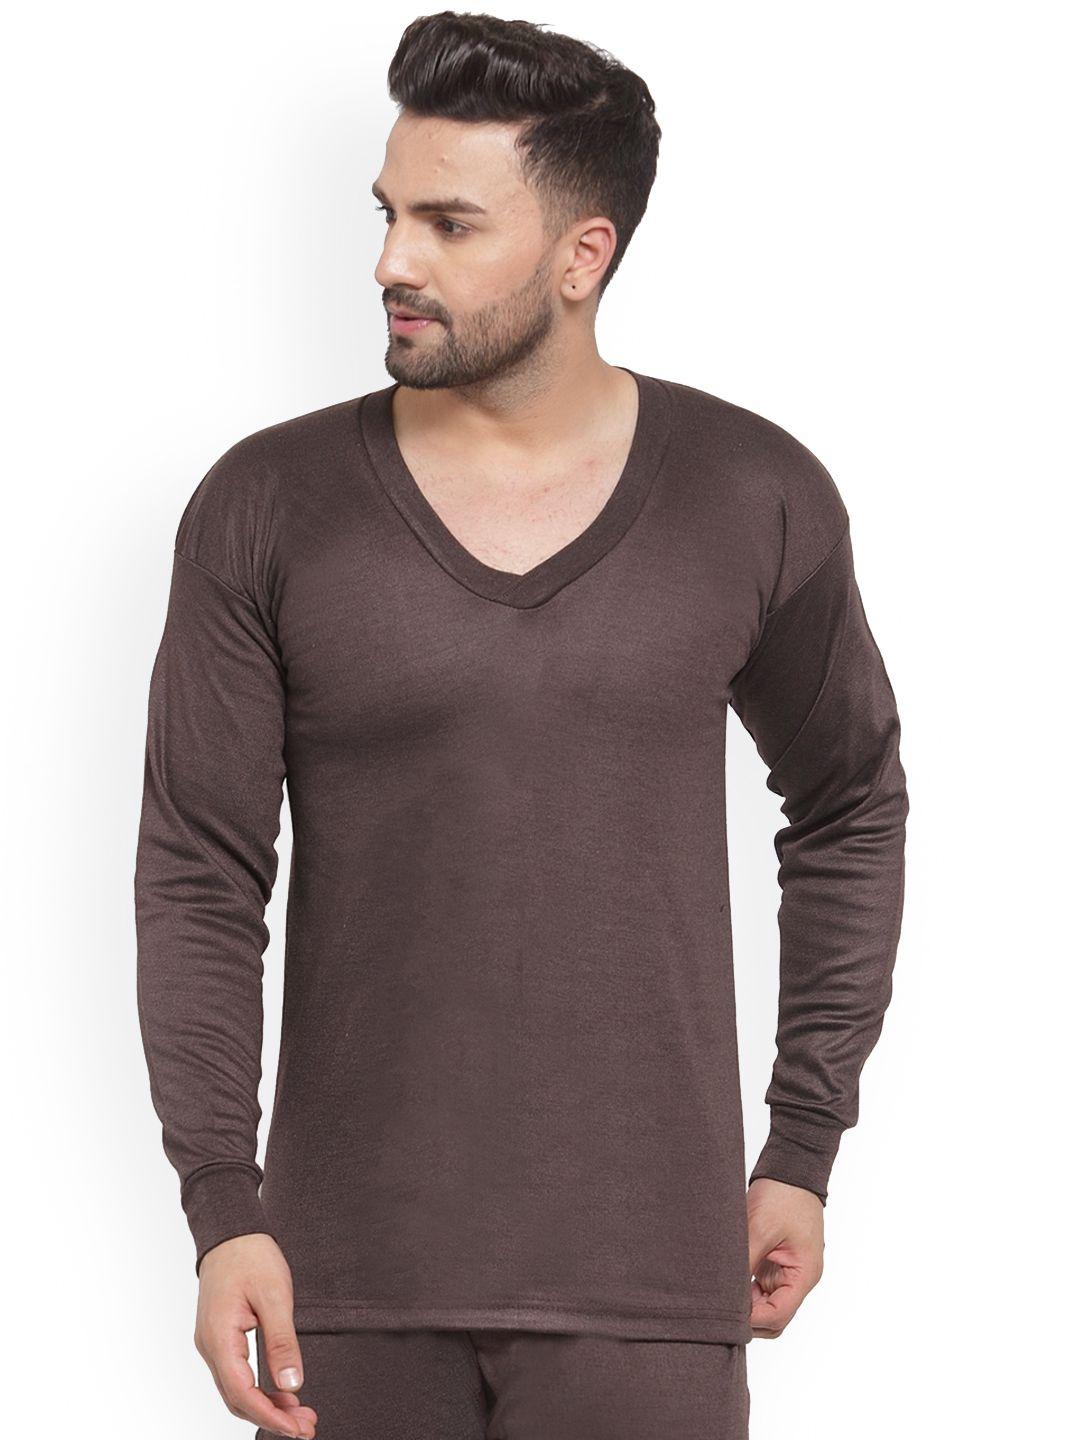 uzarus v-neck long sleeves cotton thermal top